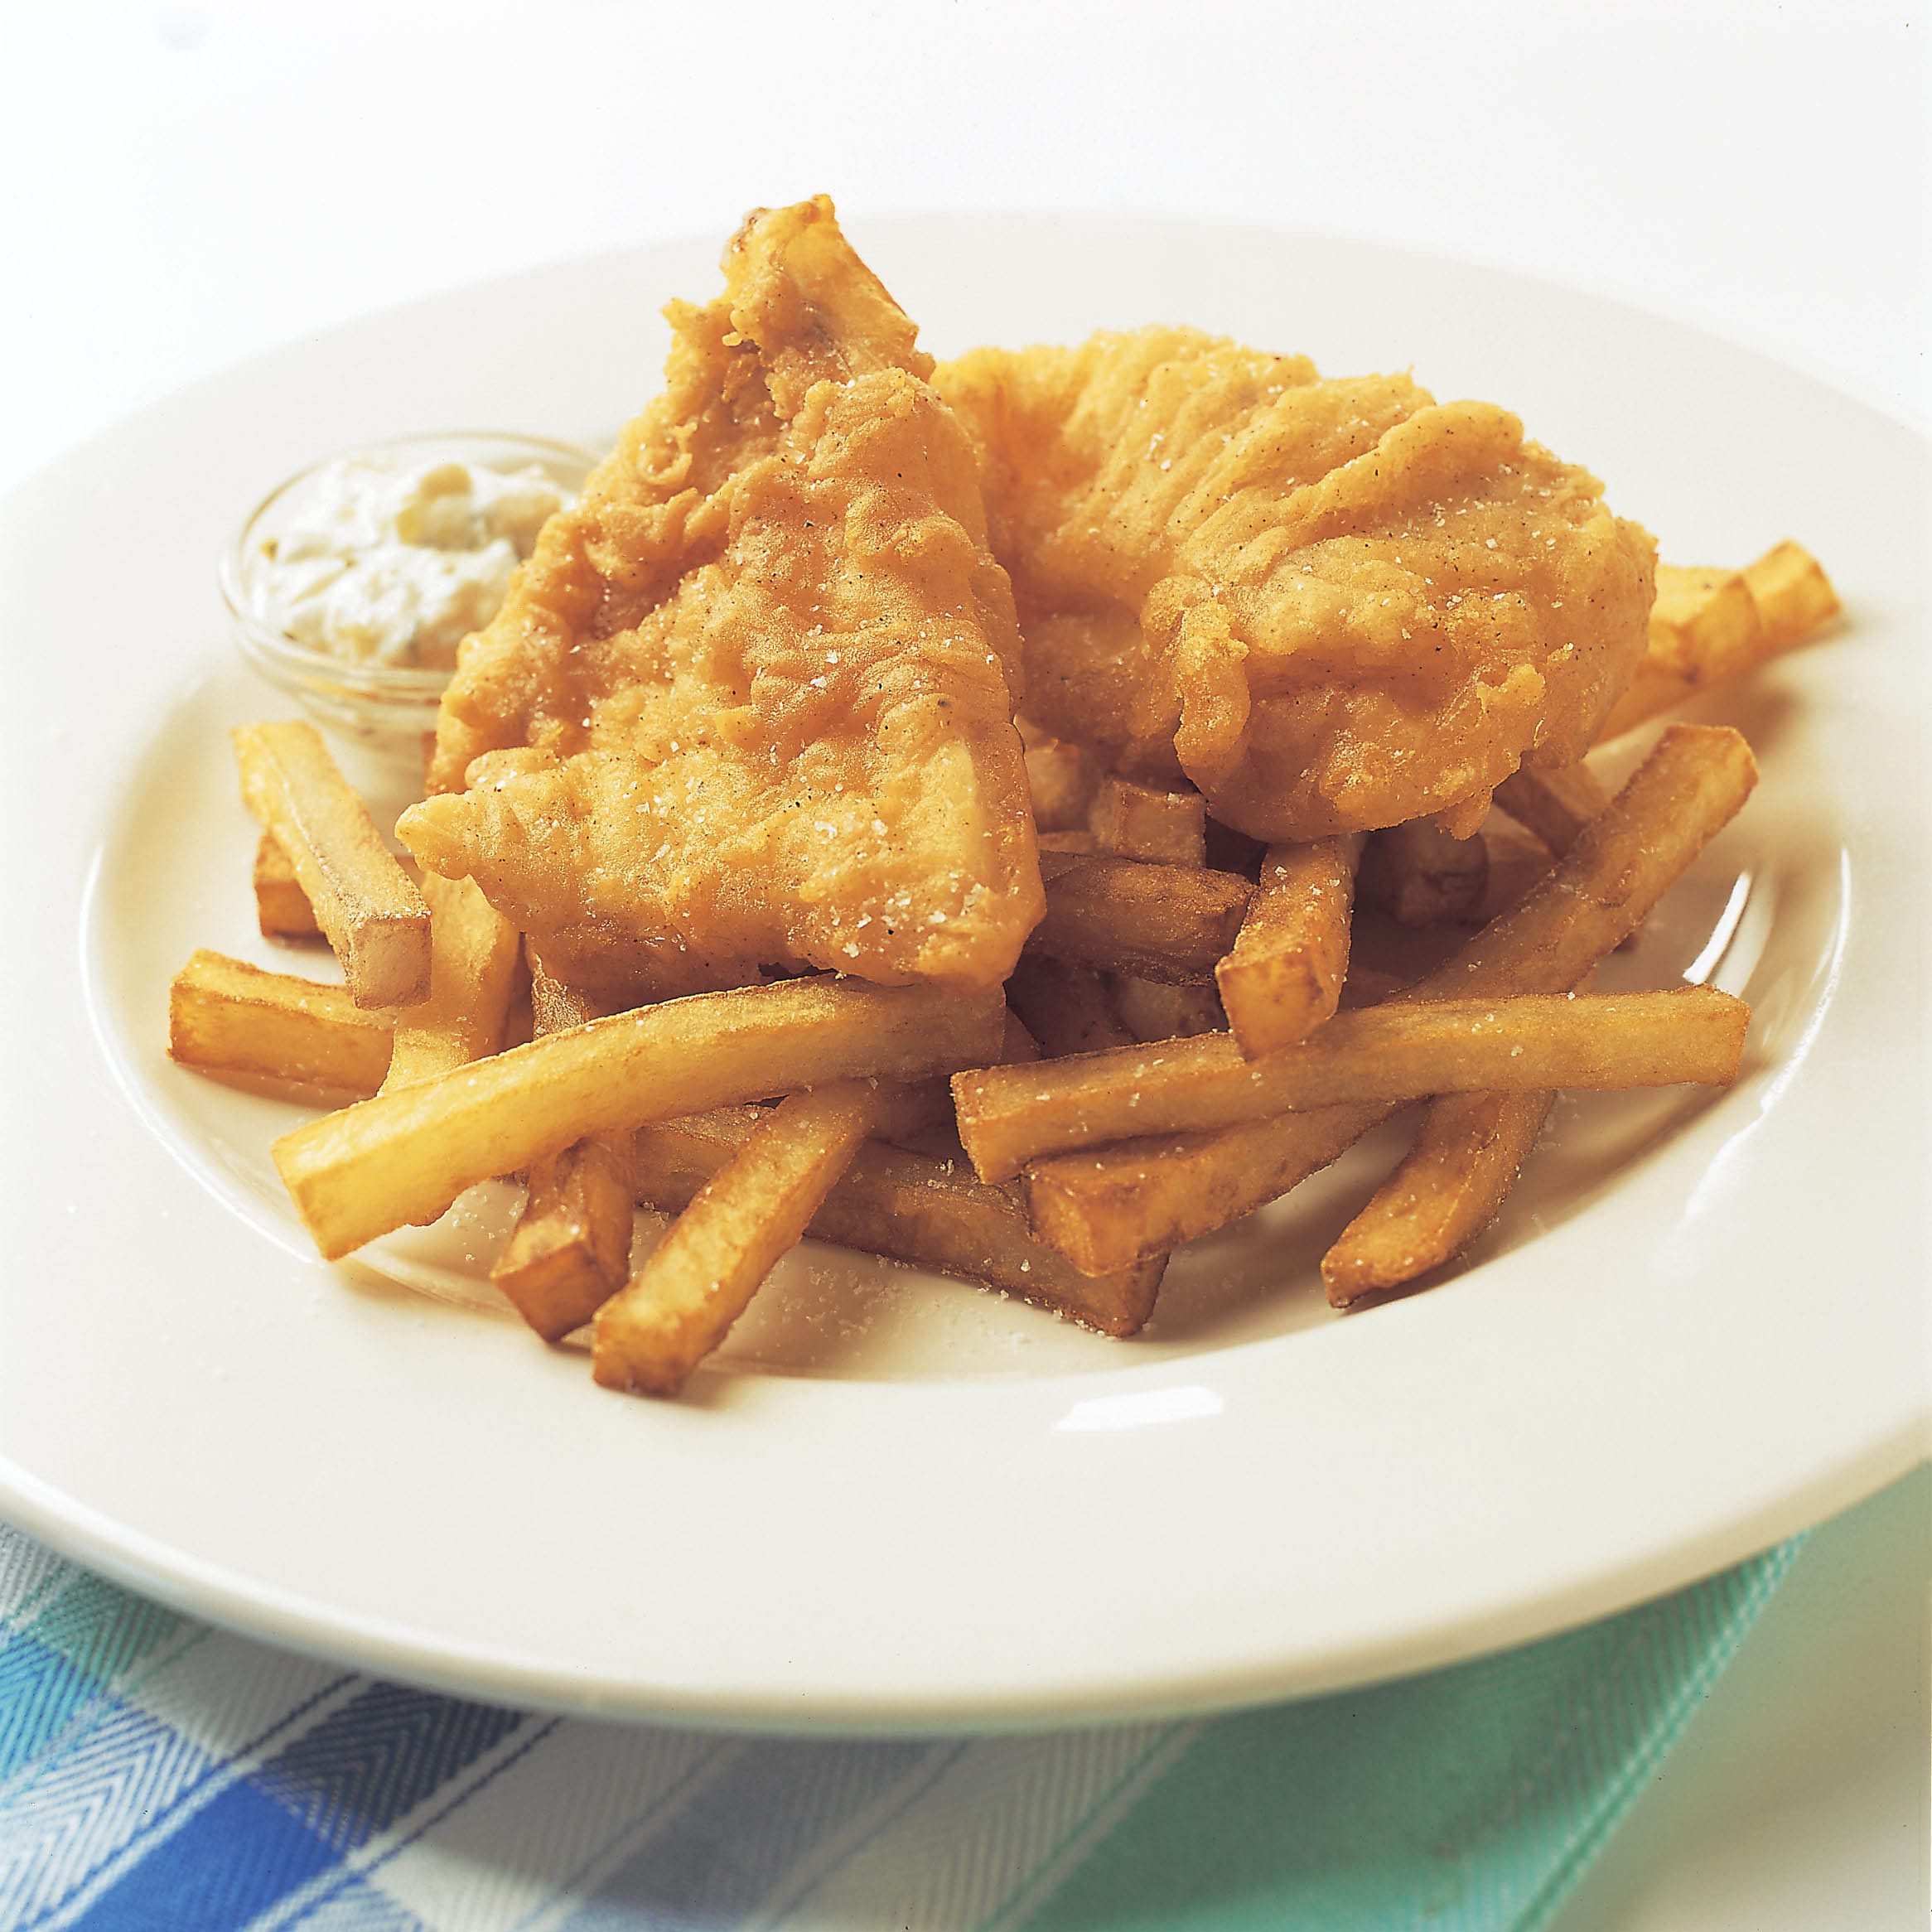 Recipes For Fish And Chips
 Fish and Chips Recipe Cook s Illustrated